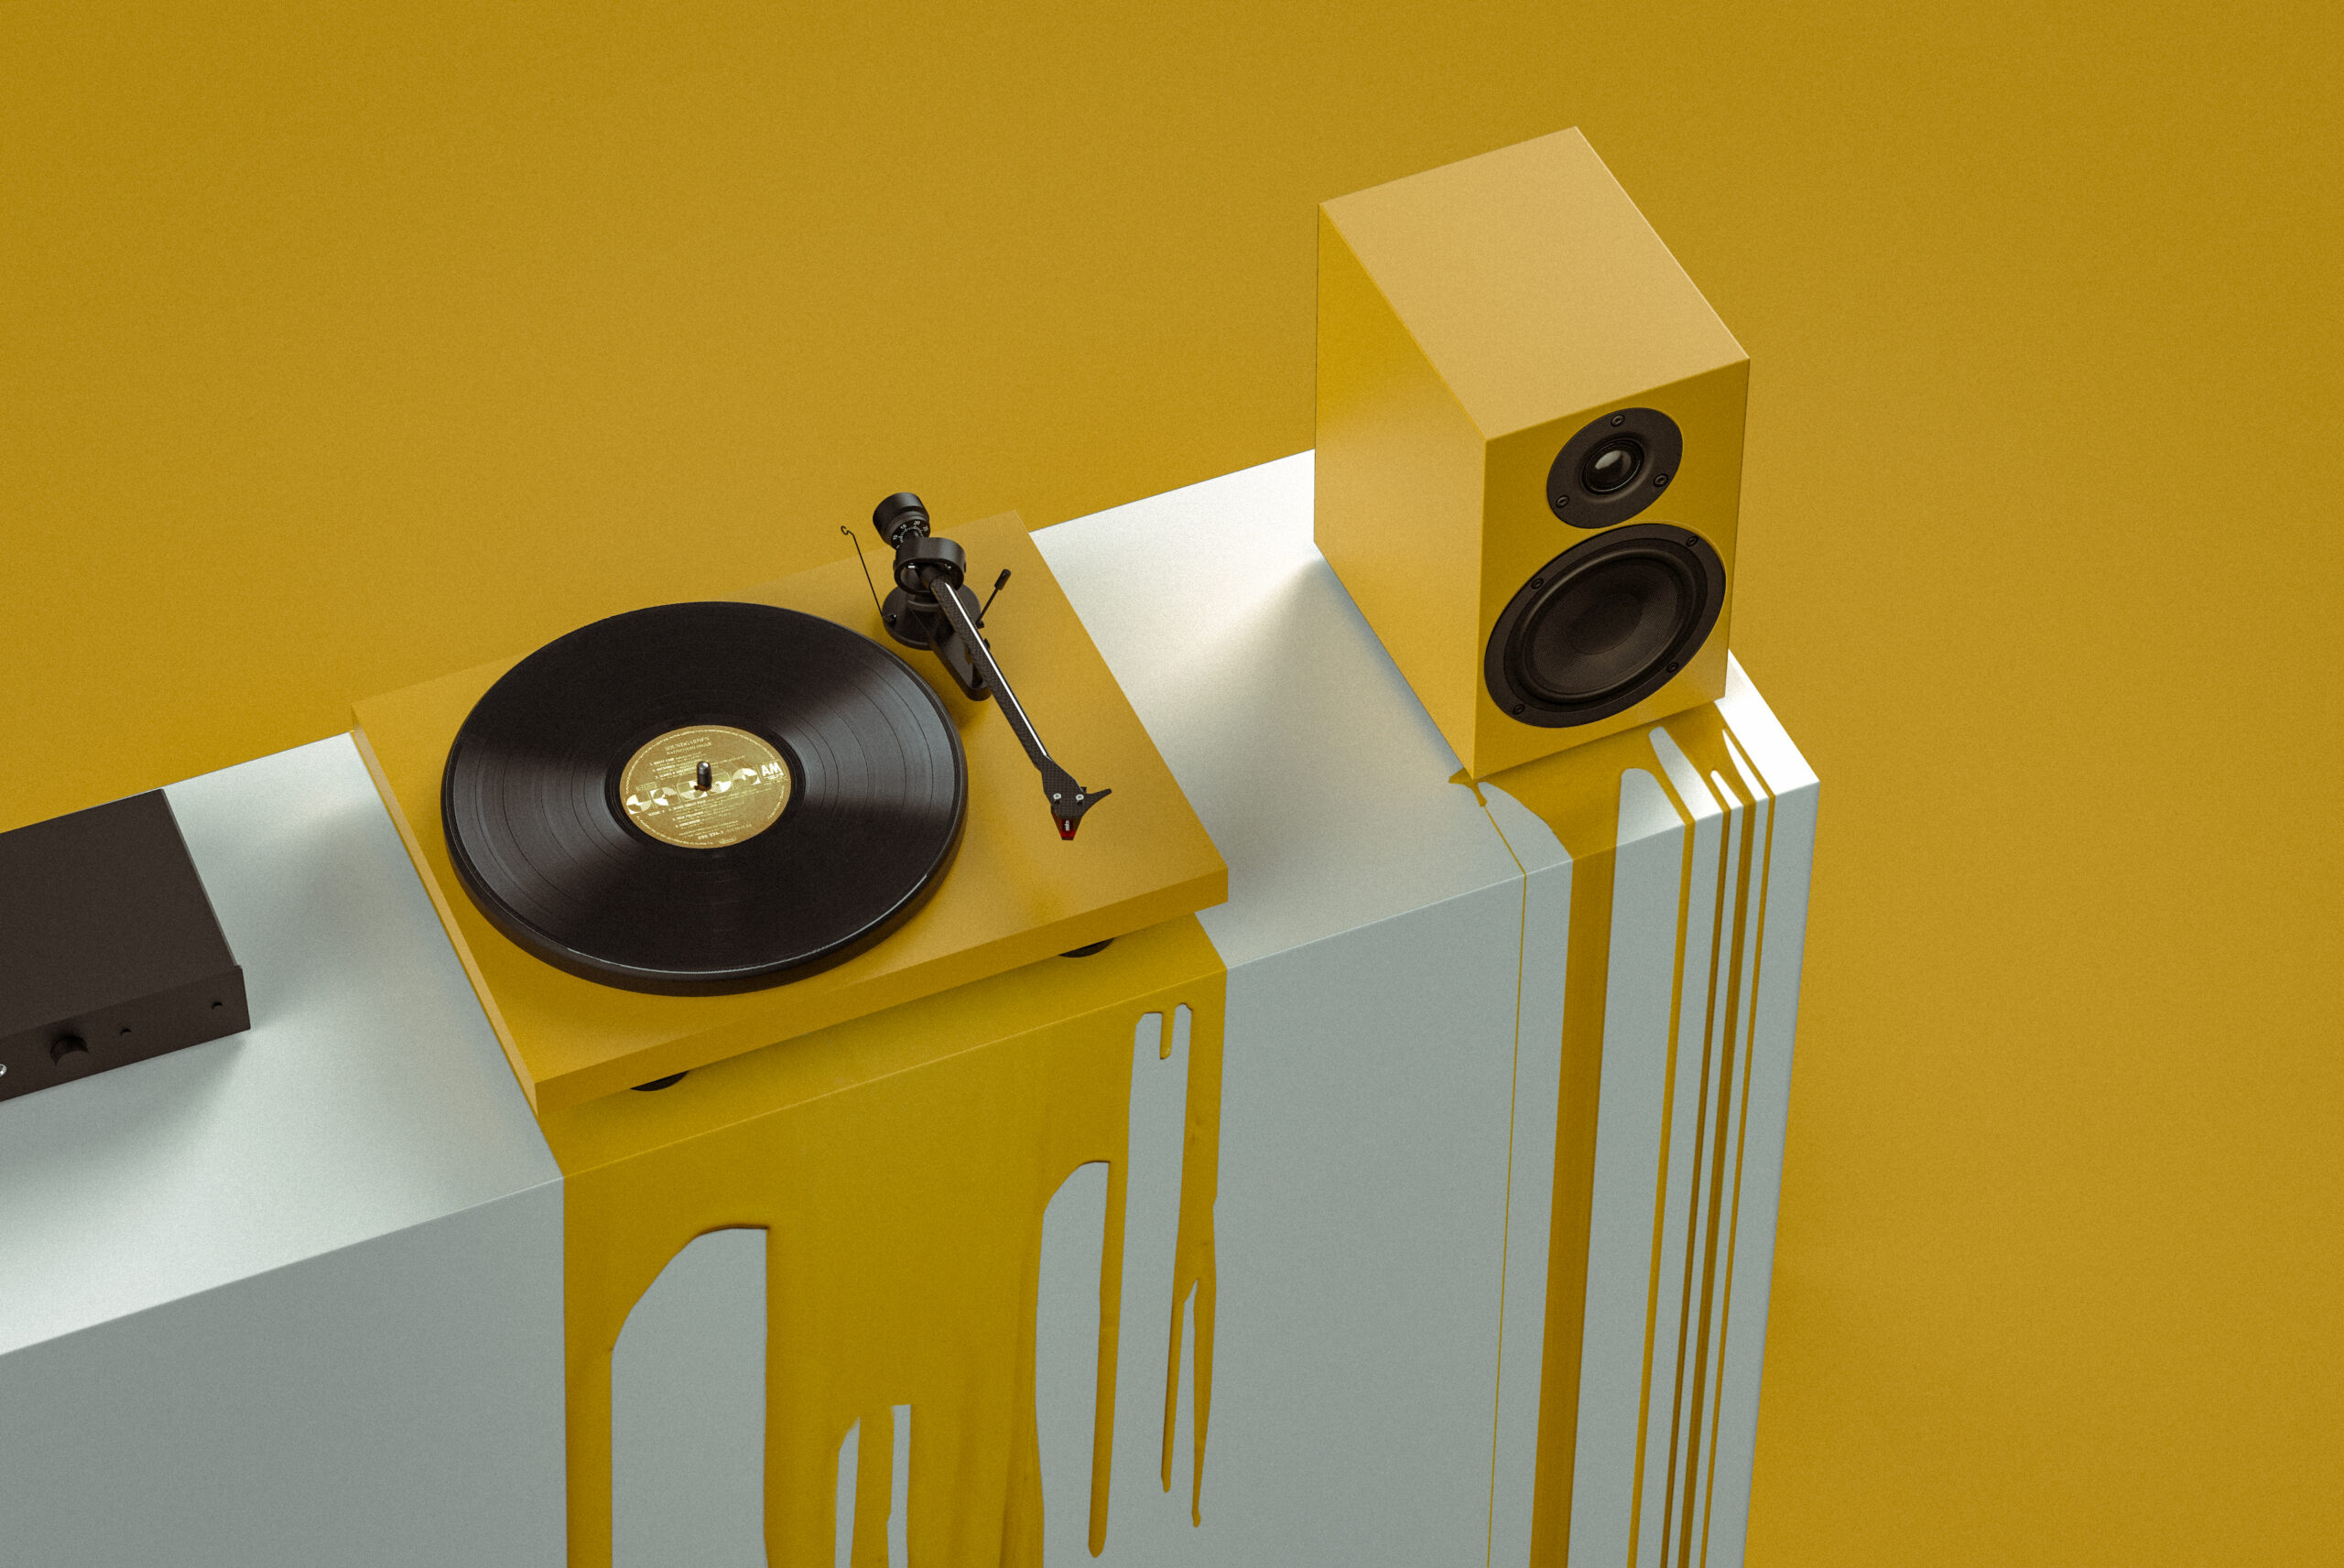 Pro-Ject, Colourful Audio Set, All-in-one Equipo Completo & Tocadiscos